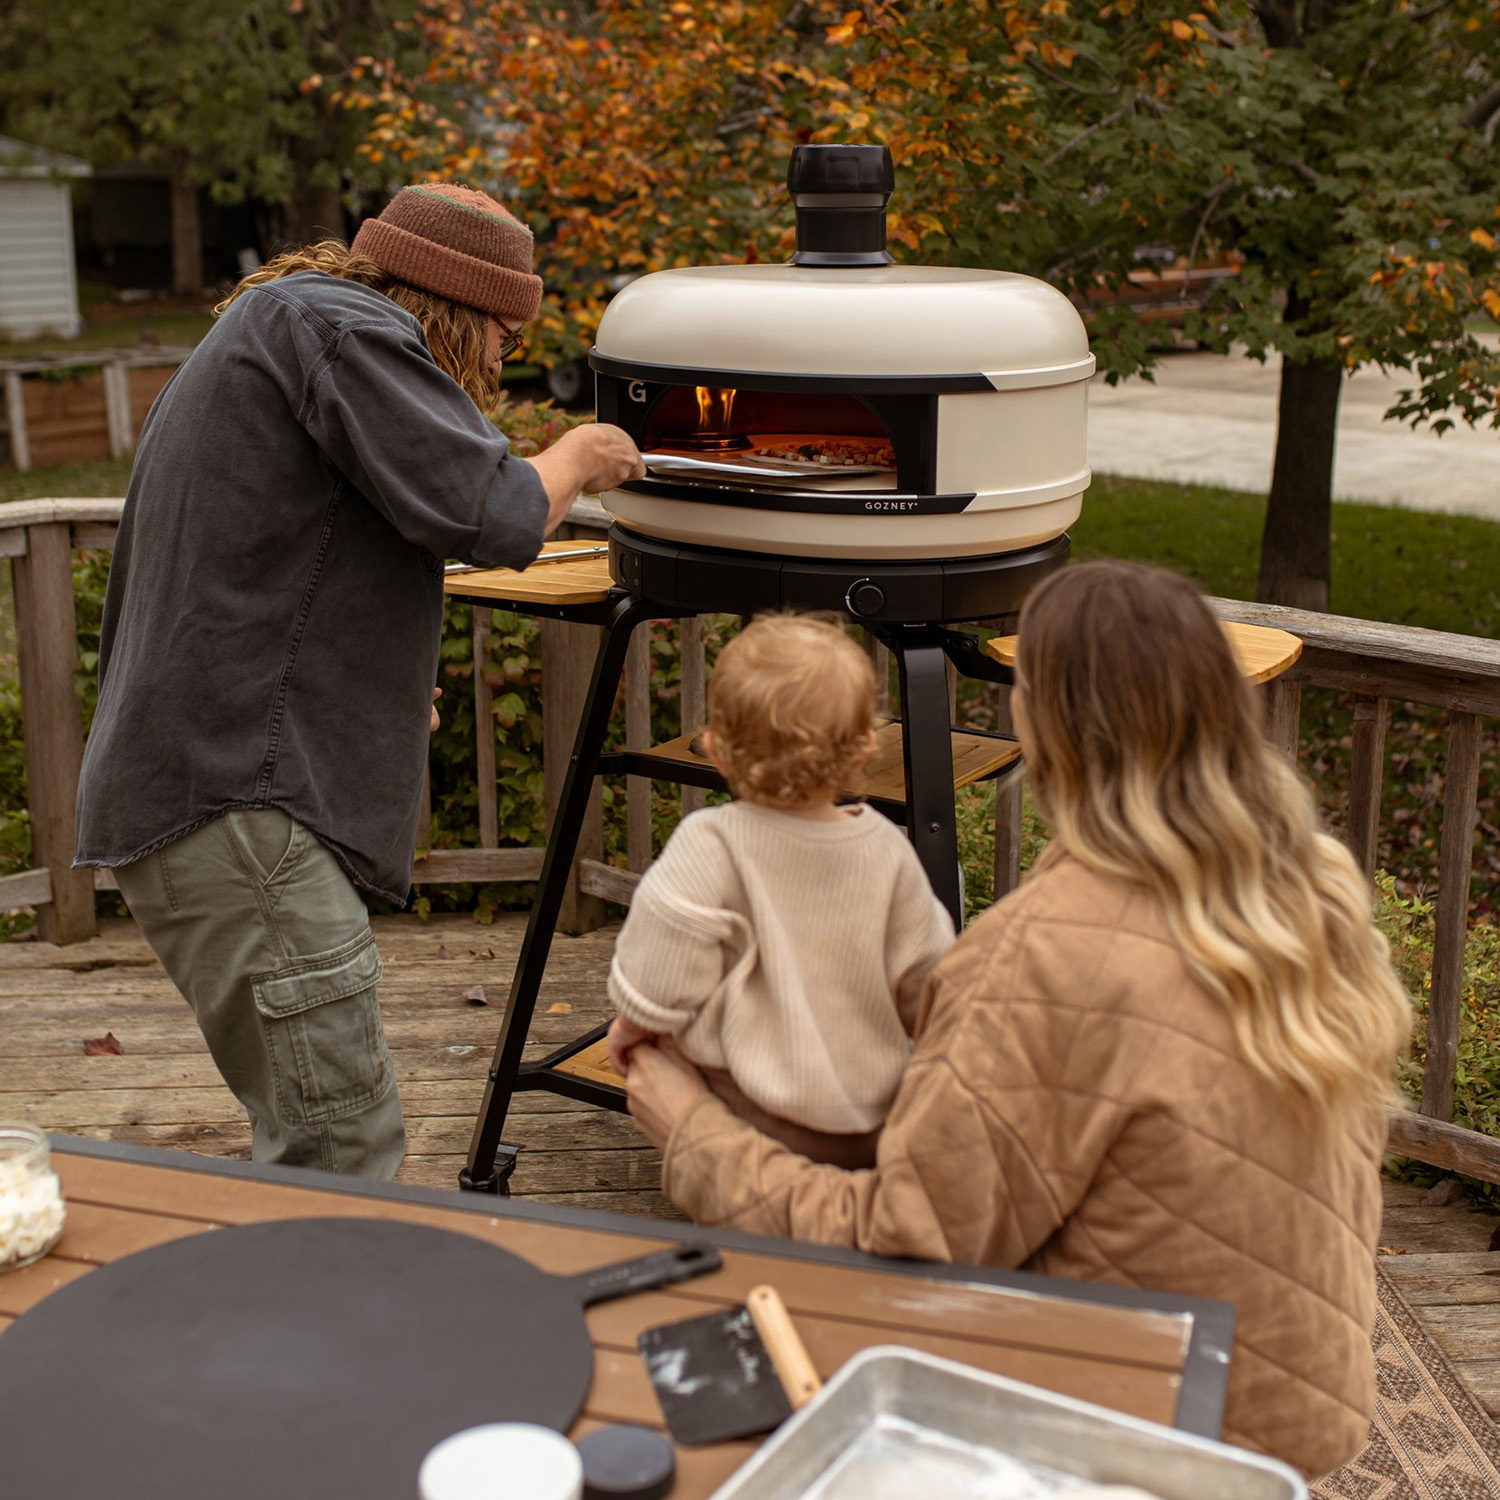 gozney pizza oven best christmas present for family and dad